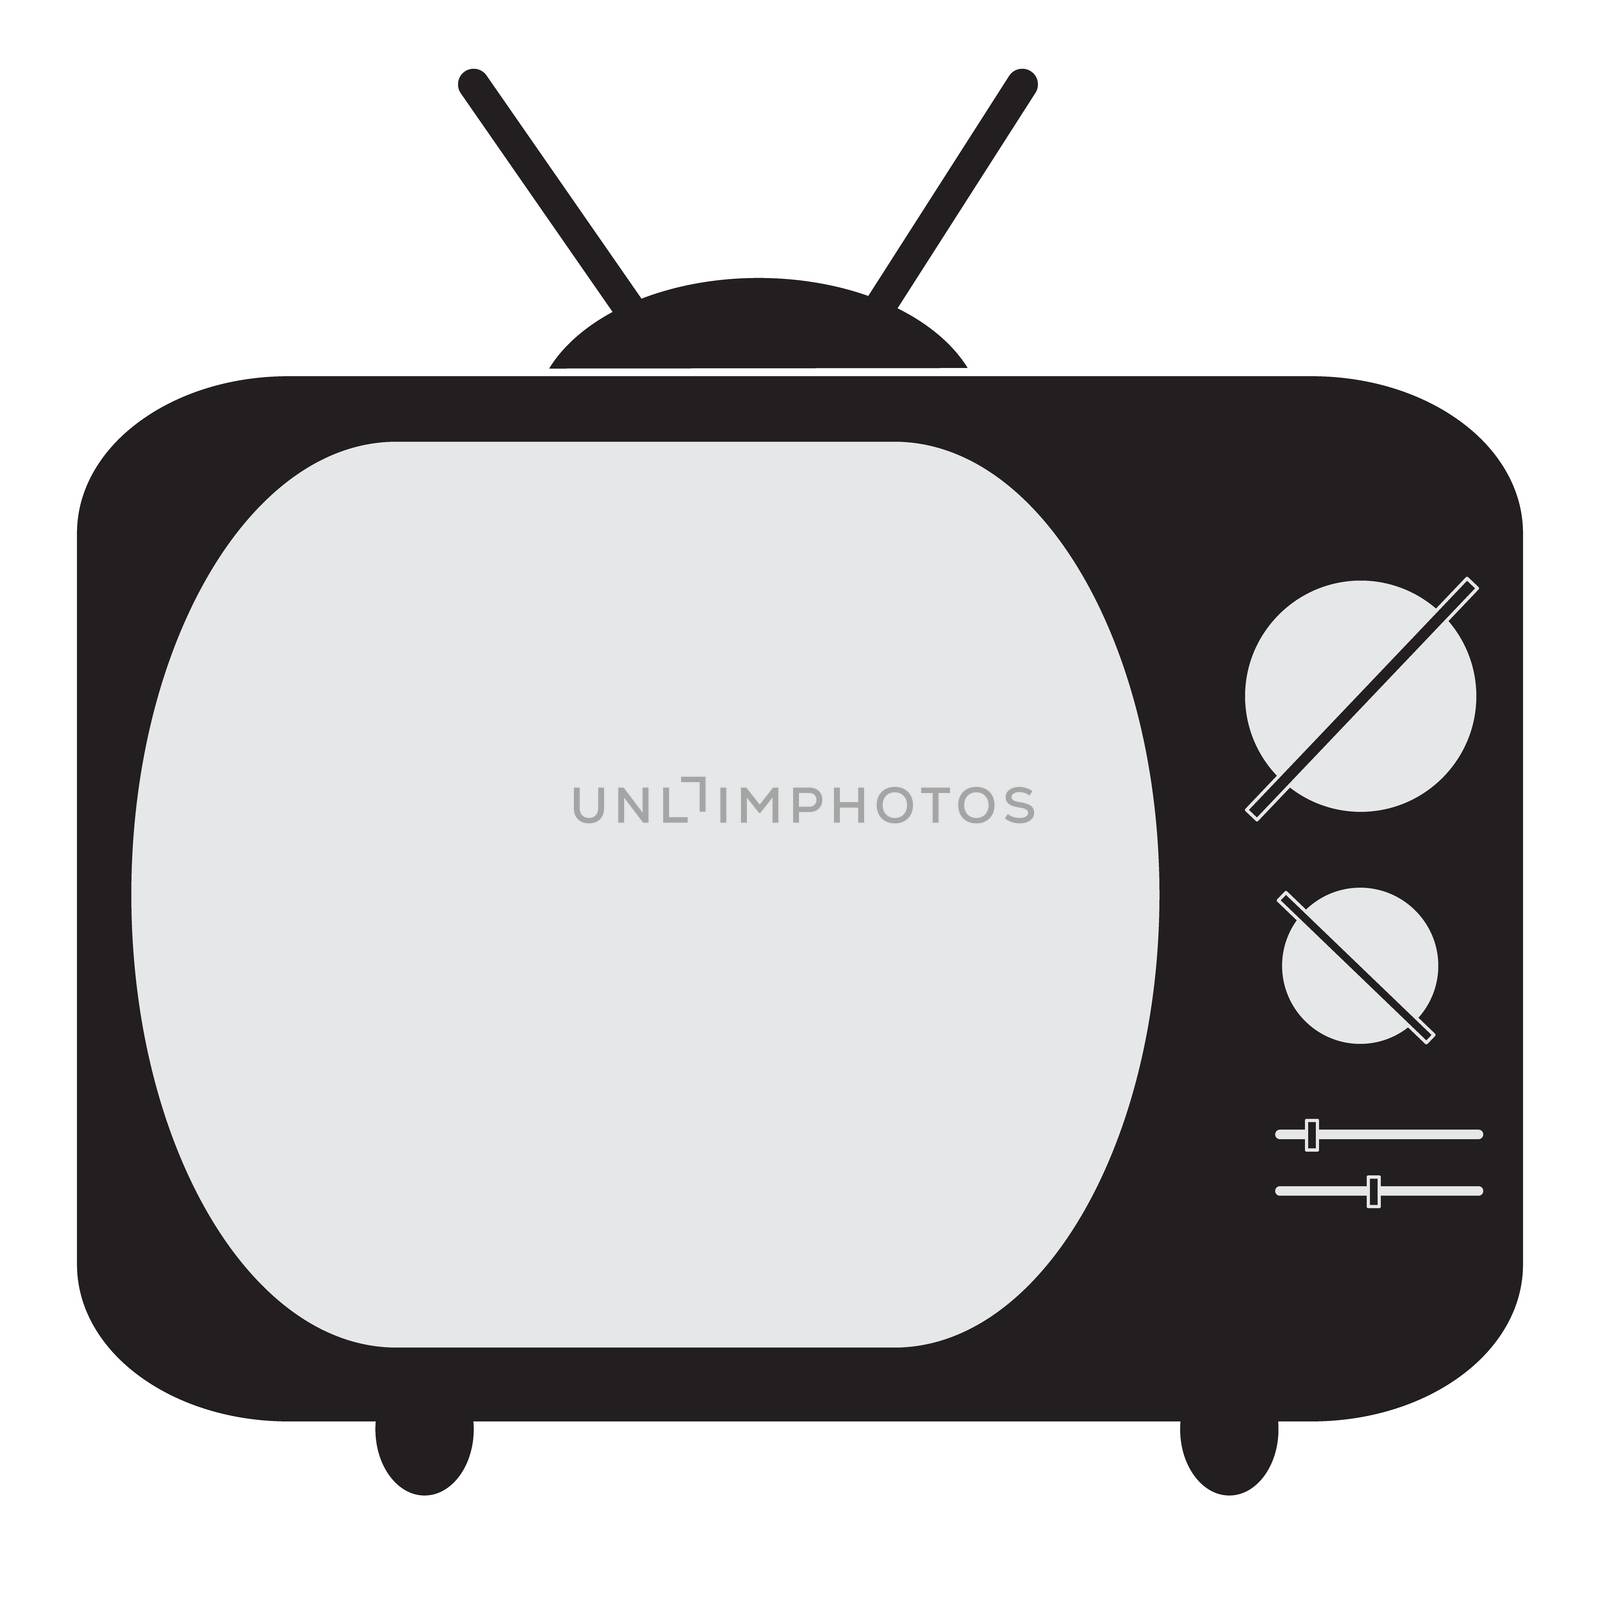 Old TV (Television) icon on white background. flat style. Retro tv icon for your web site design, logo, app, UI. Television sign. Old TV symbol.